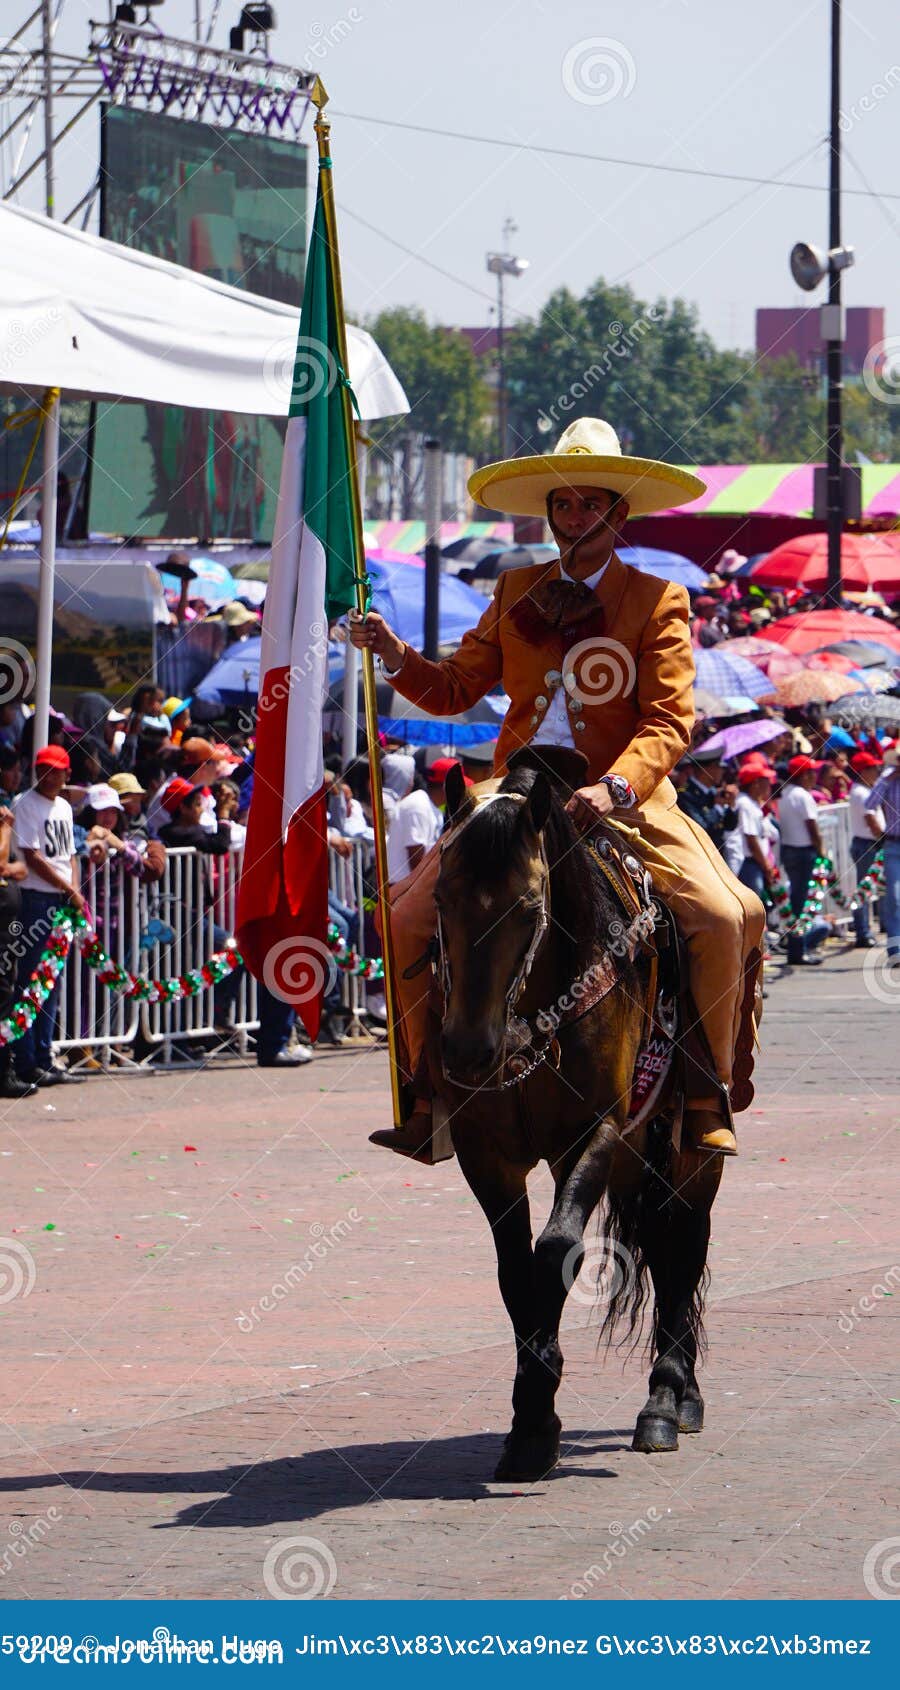 Horse sex with in Toluca her Shy girl